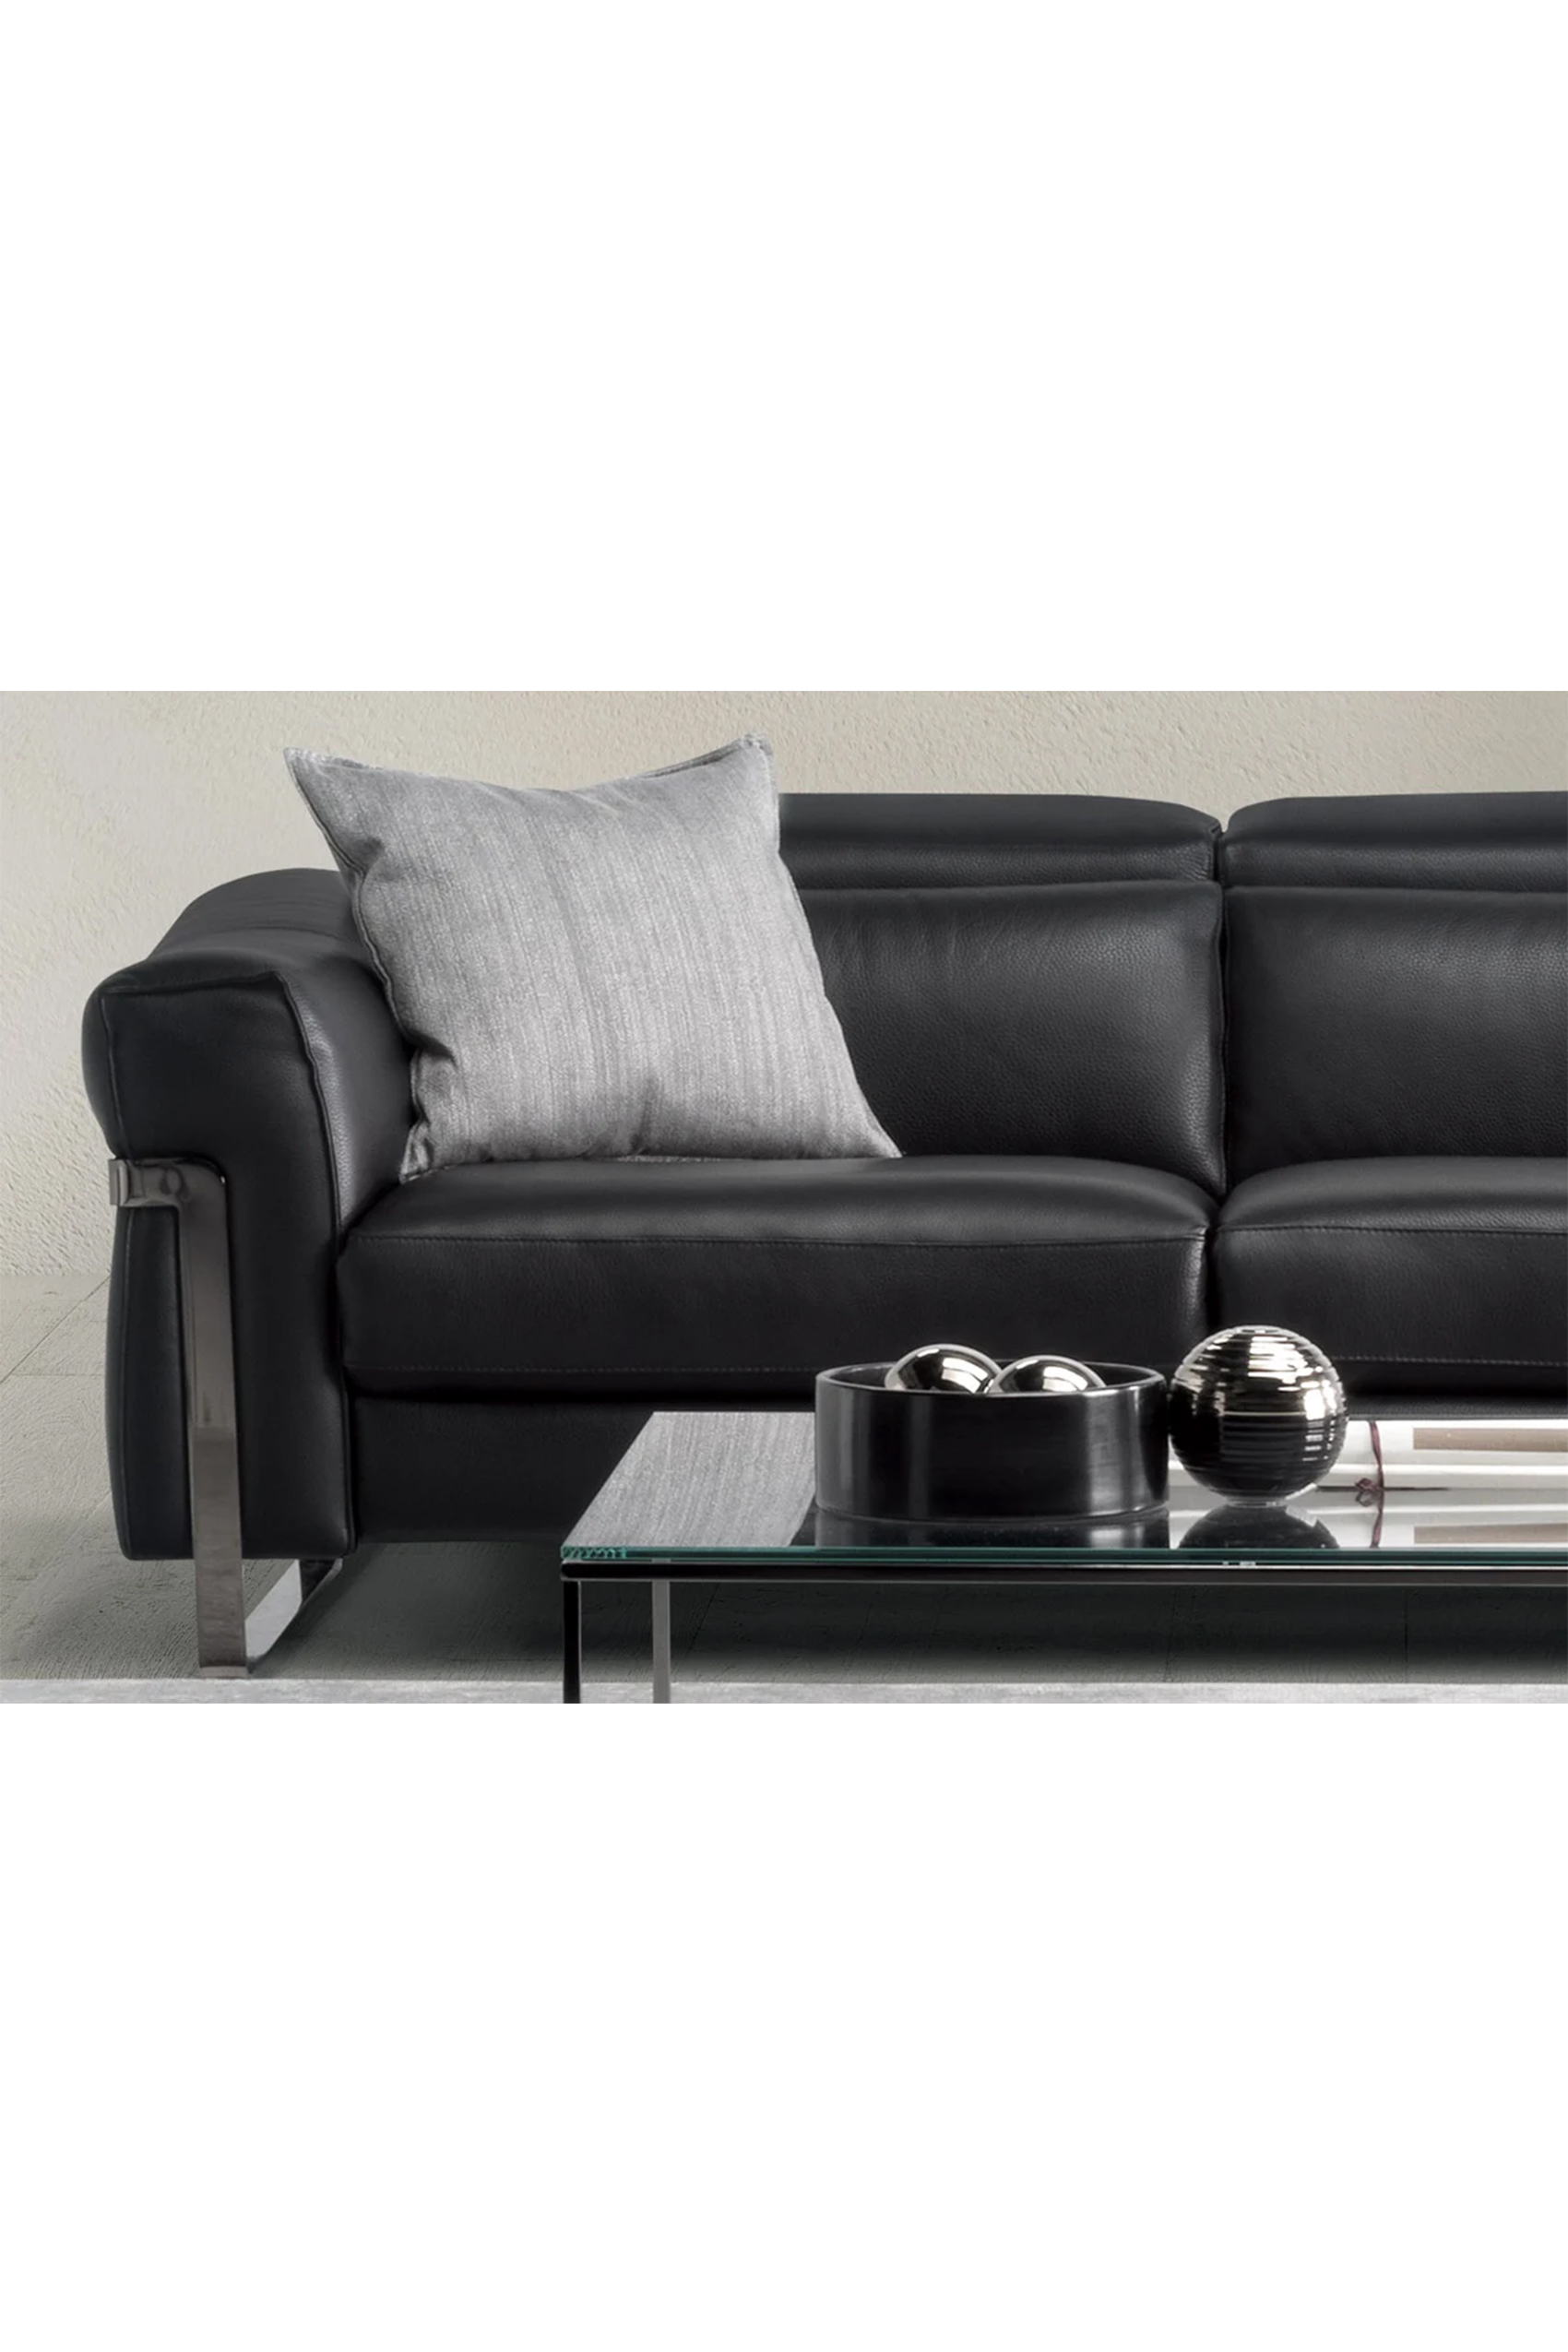 Cameri Leather Sofa With Dual Recliner